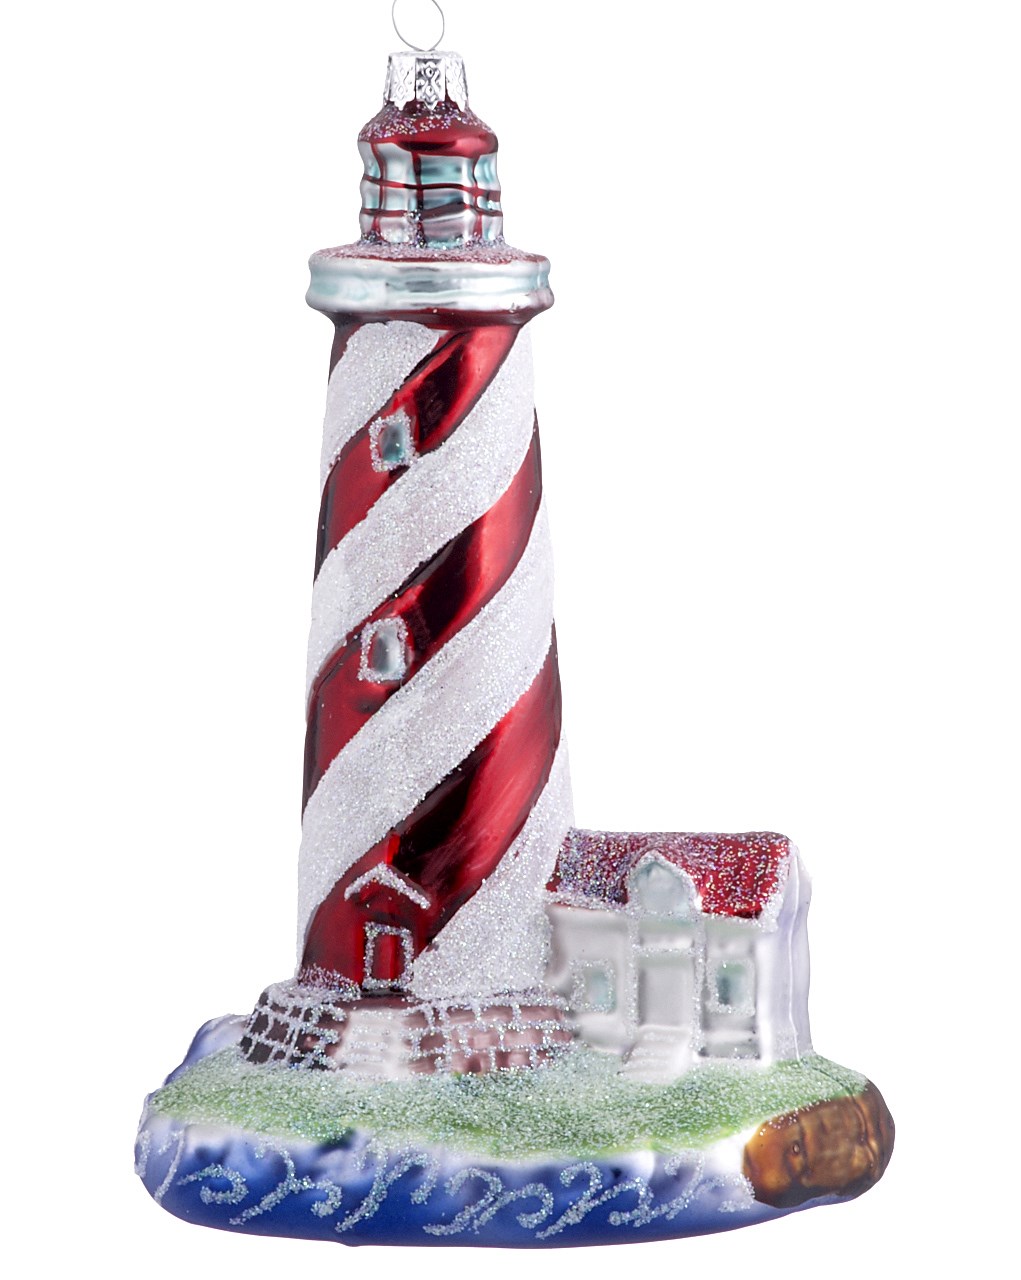 A red and white striped lighthouse resembling a candy cane- perfect for a beach themed Christmas tree. | OrnamentShop.com